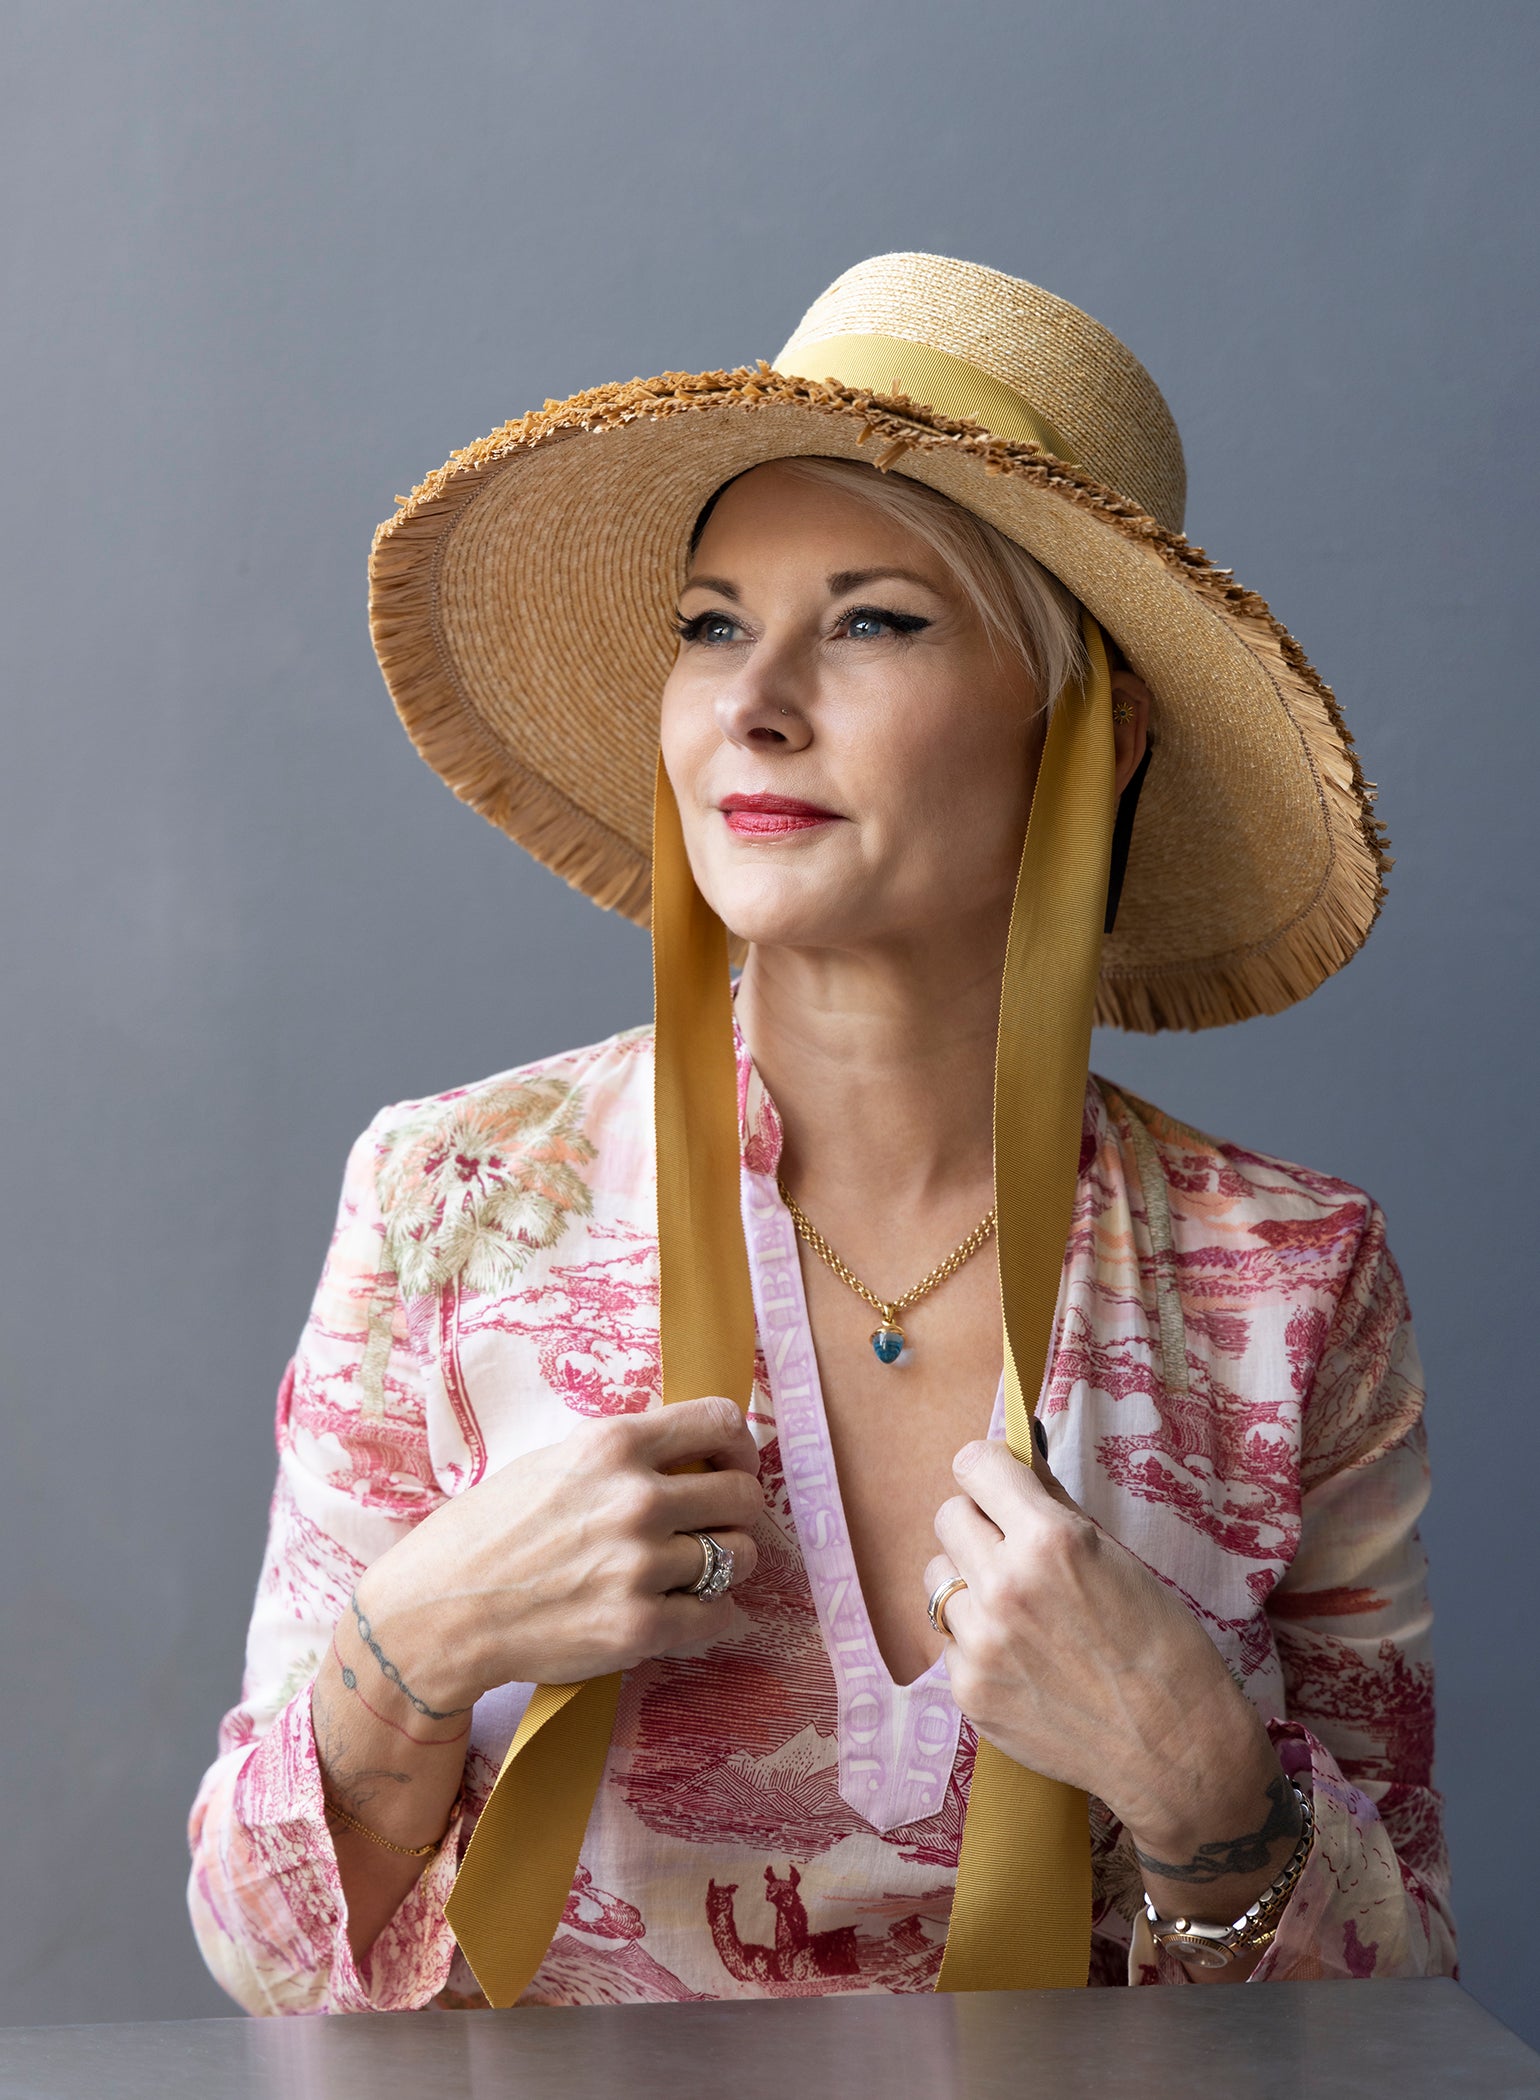 Straw beach hat with double row of fringe on the brim. Crown has two gold grommets on the sides with a matching wide ribbon threaded through the grommets. Hat is shown on a model holding the ribbon.